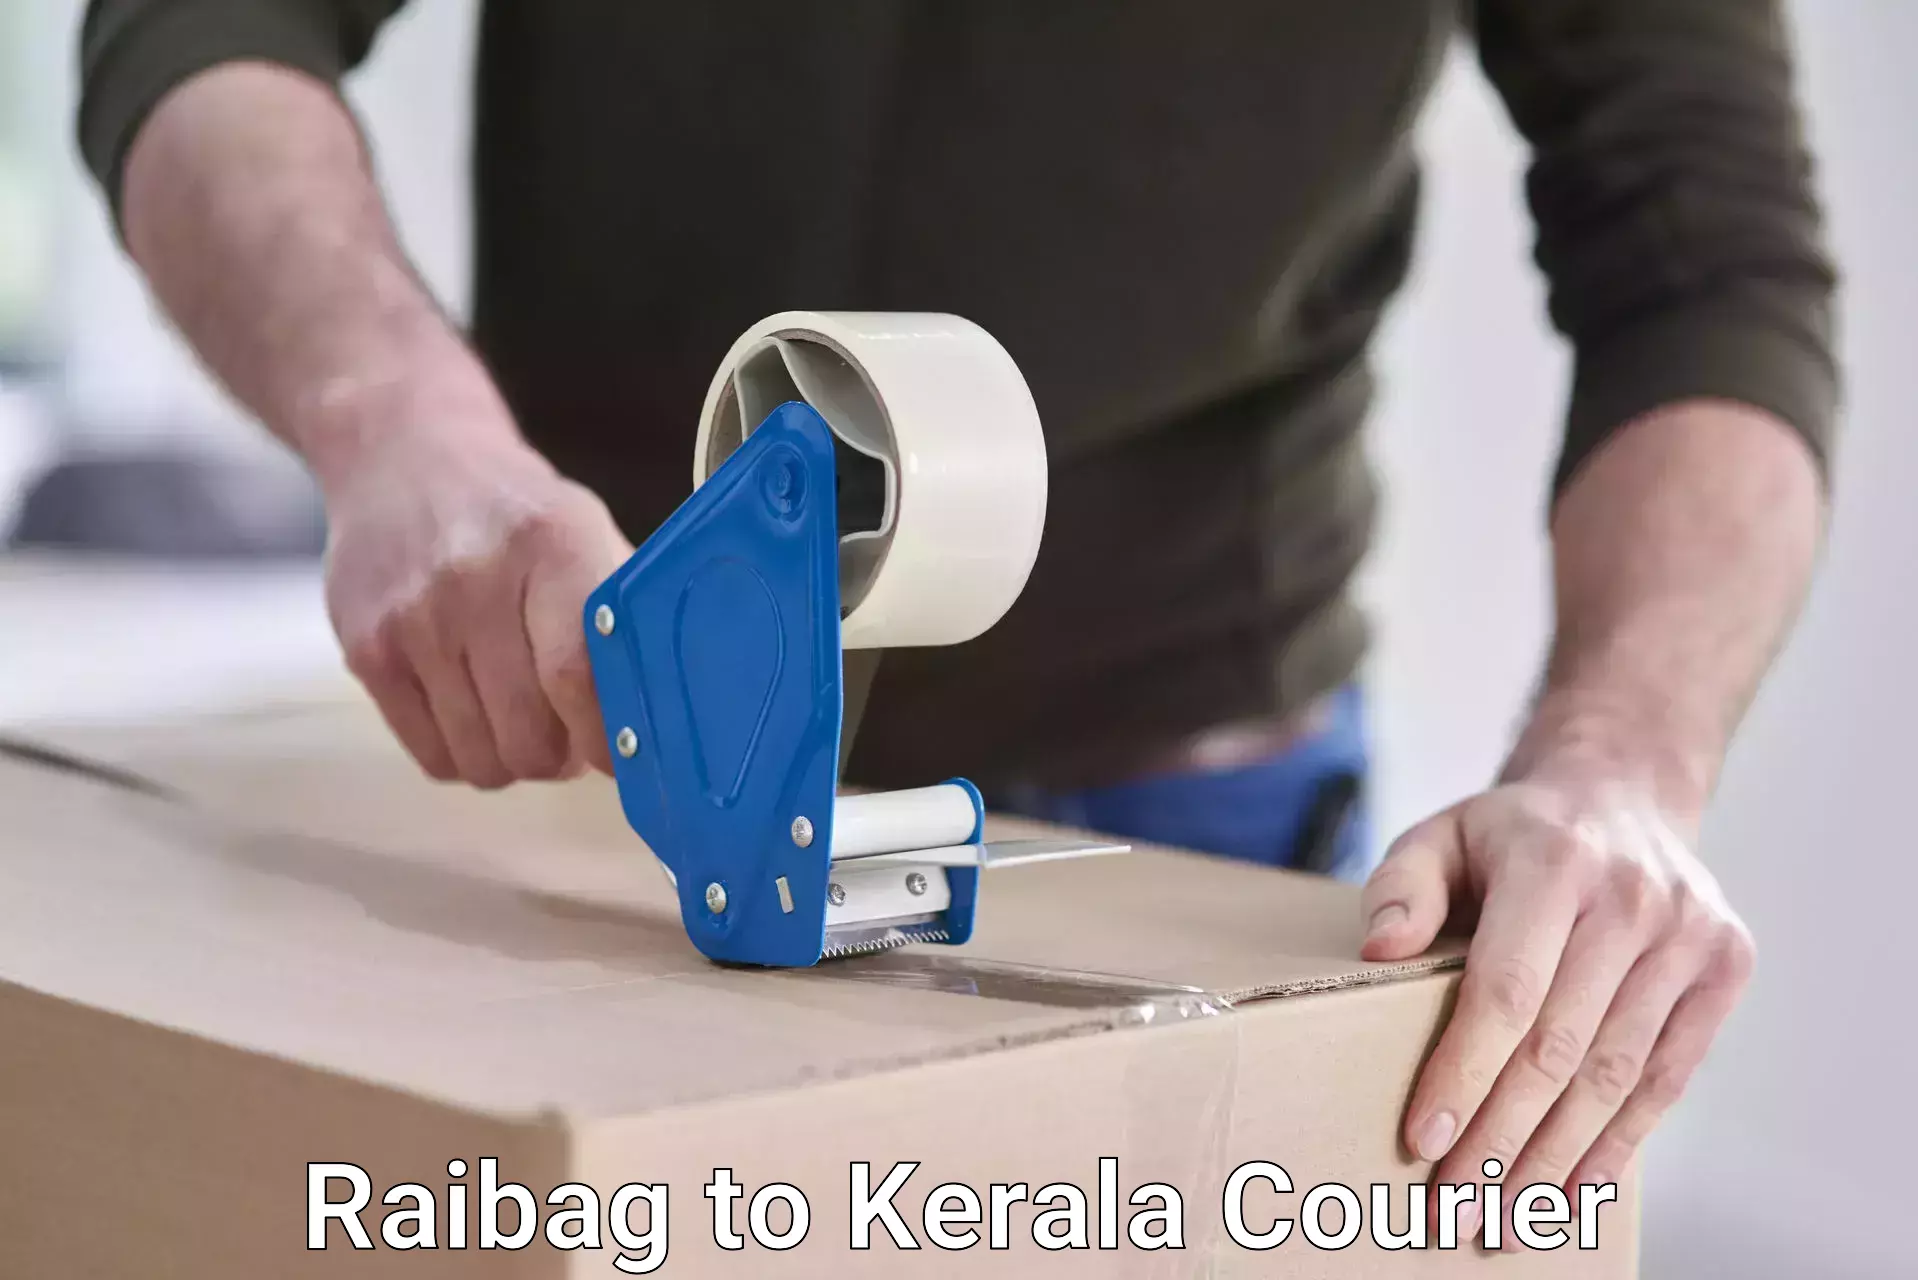 Advanced tracking systems in Raibag to Kozhikode